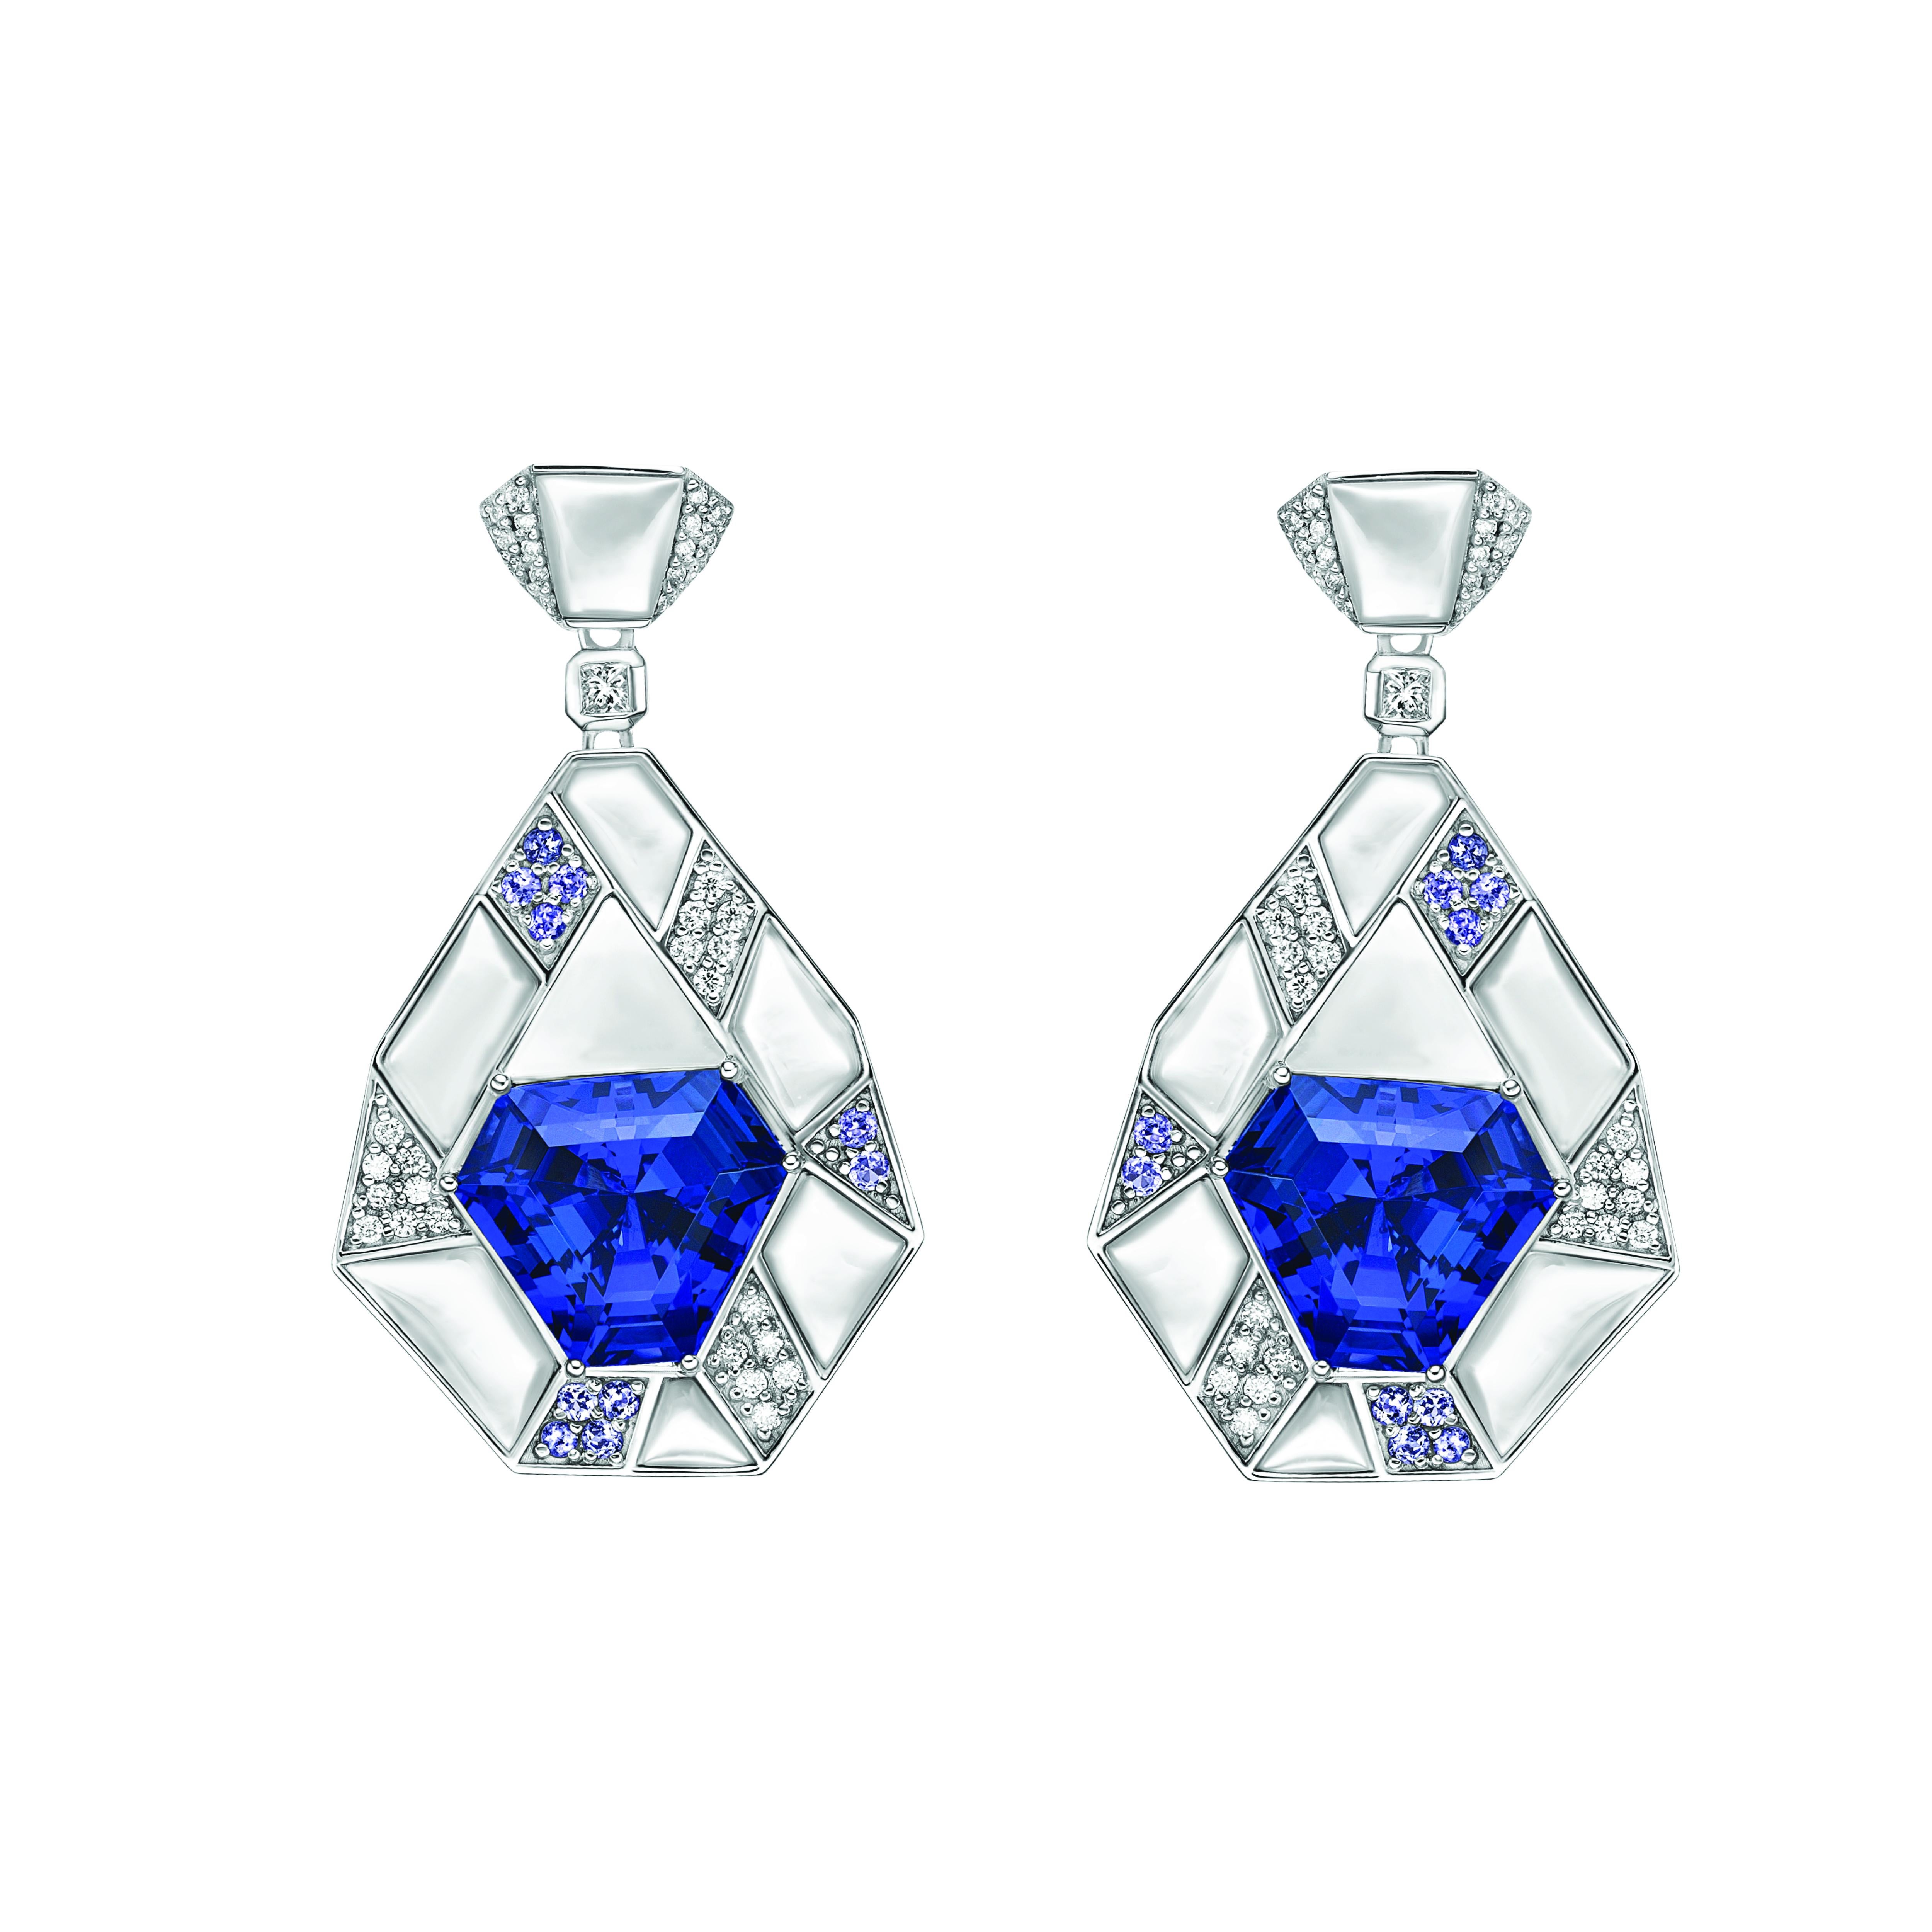 Contemporary 15.93 Carat Tanzanite Drop Earrings in 18KWG with Mother of Pearl and Diamond. For Sale